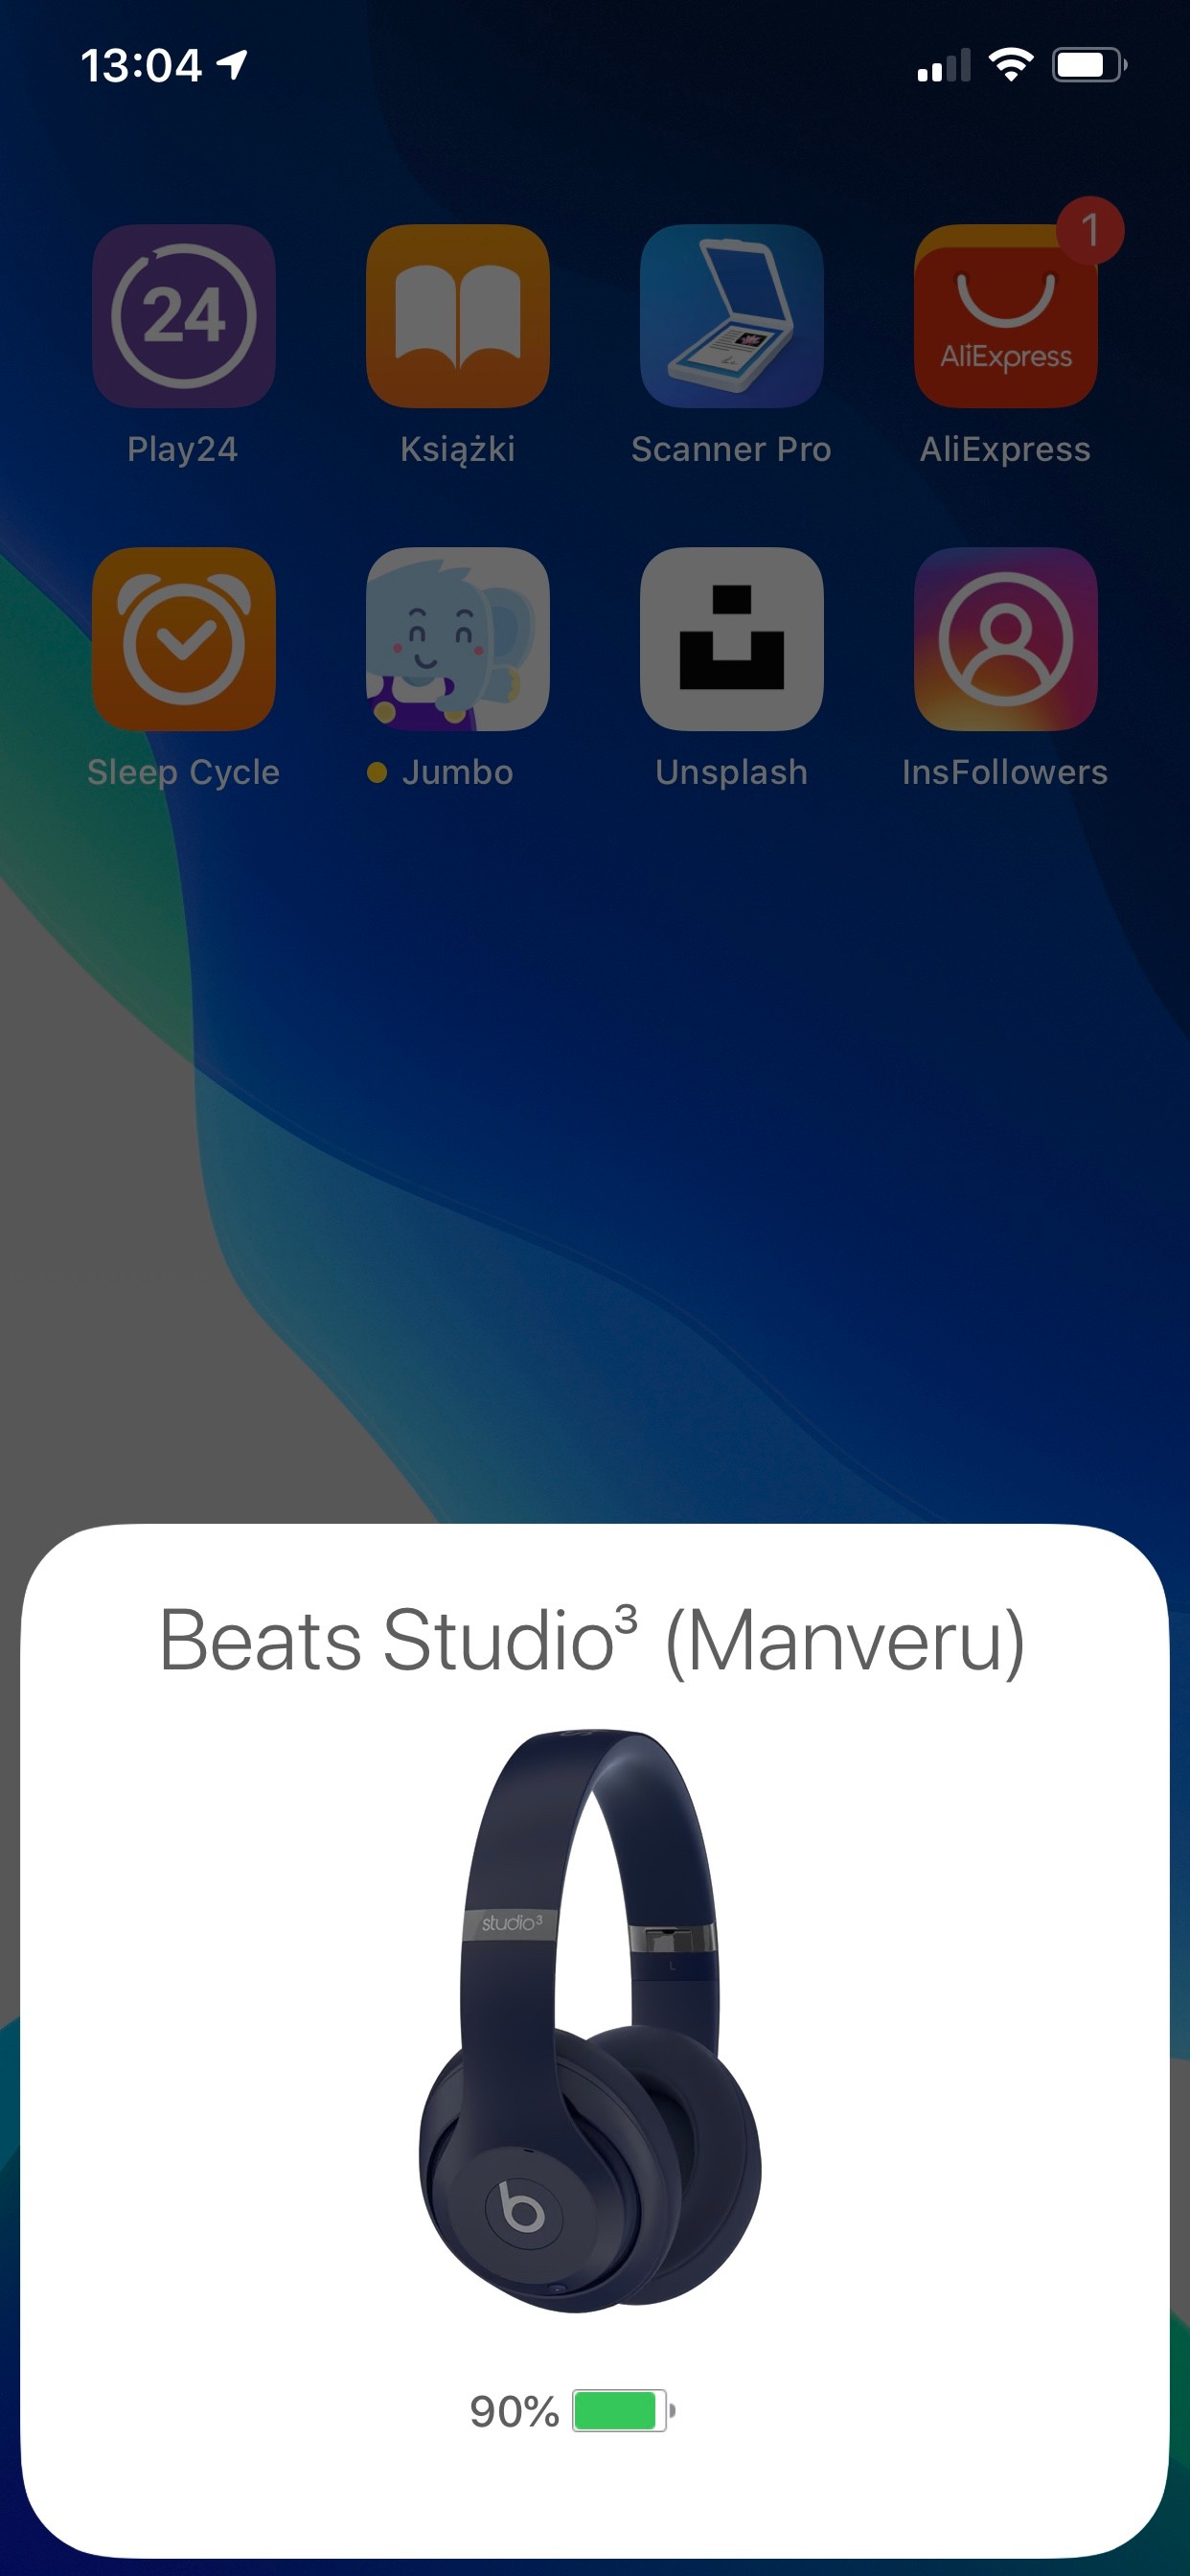 how to connect beats studio 3 to ipad